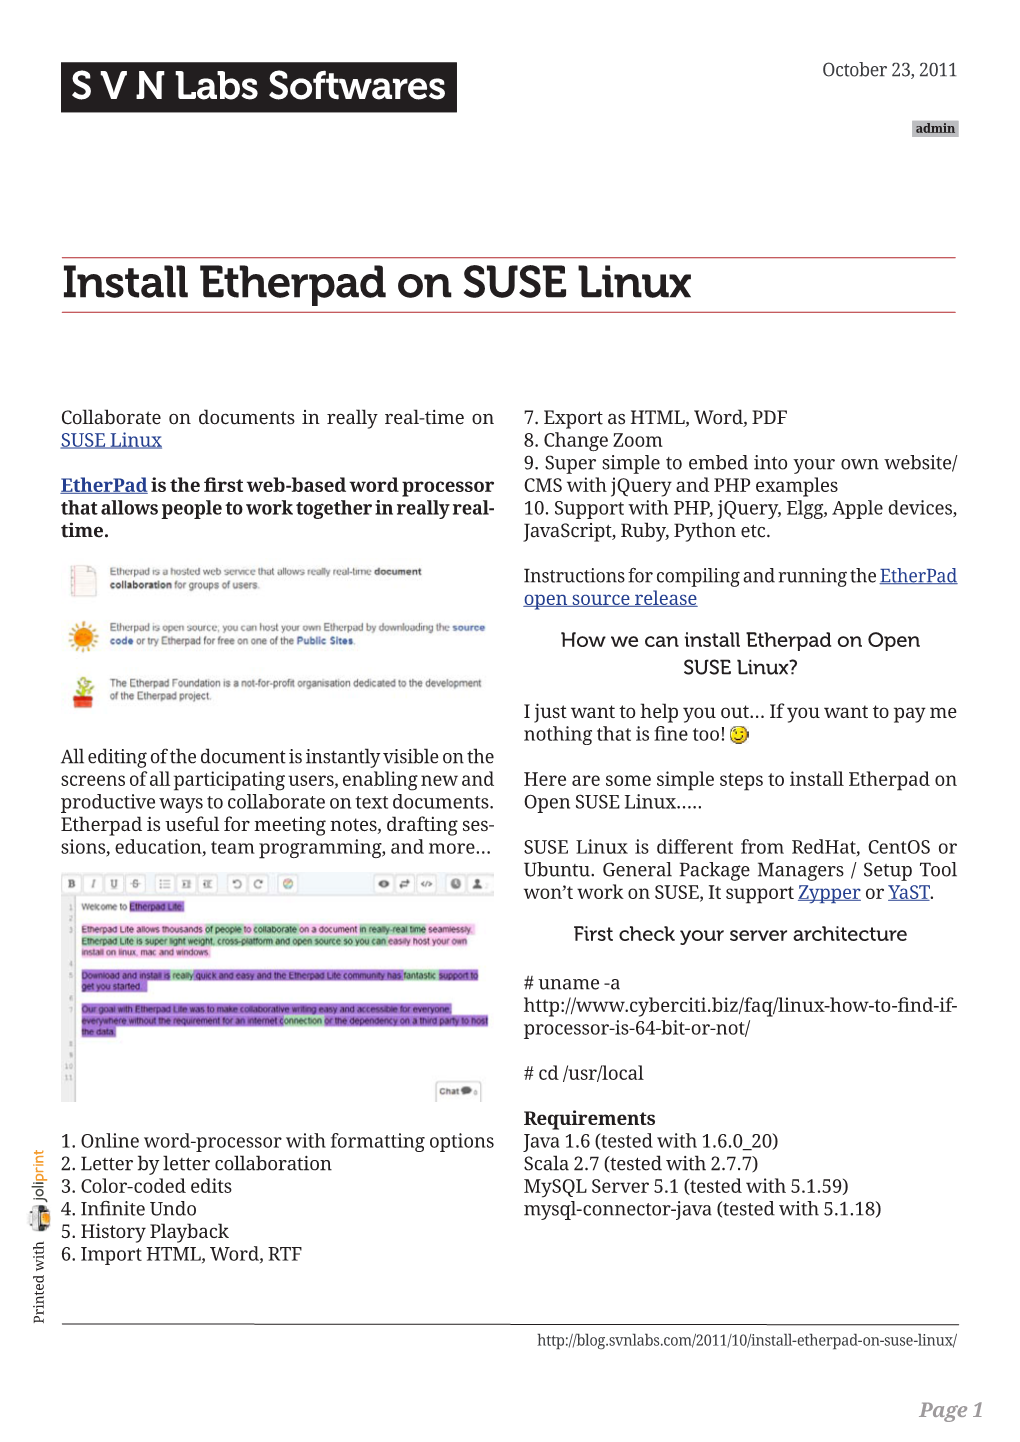 Install Etherpad on SUSE Linux S V N Labs Softwares Is the First Web-Based Word Processor